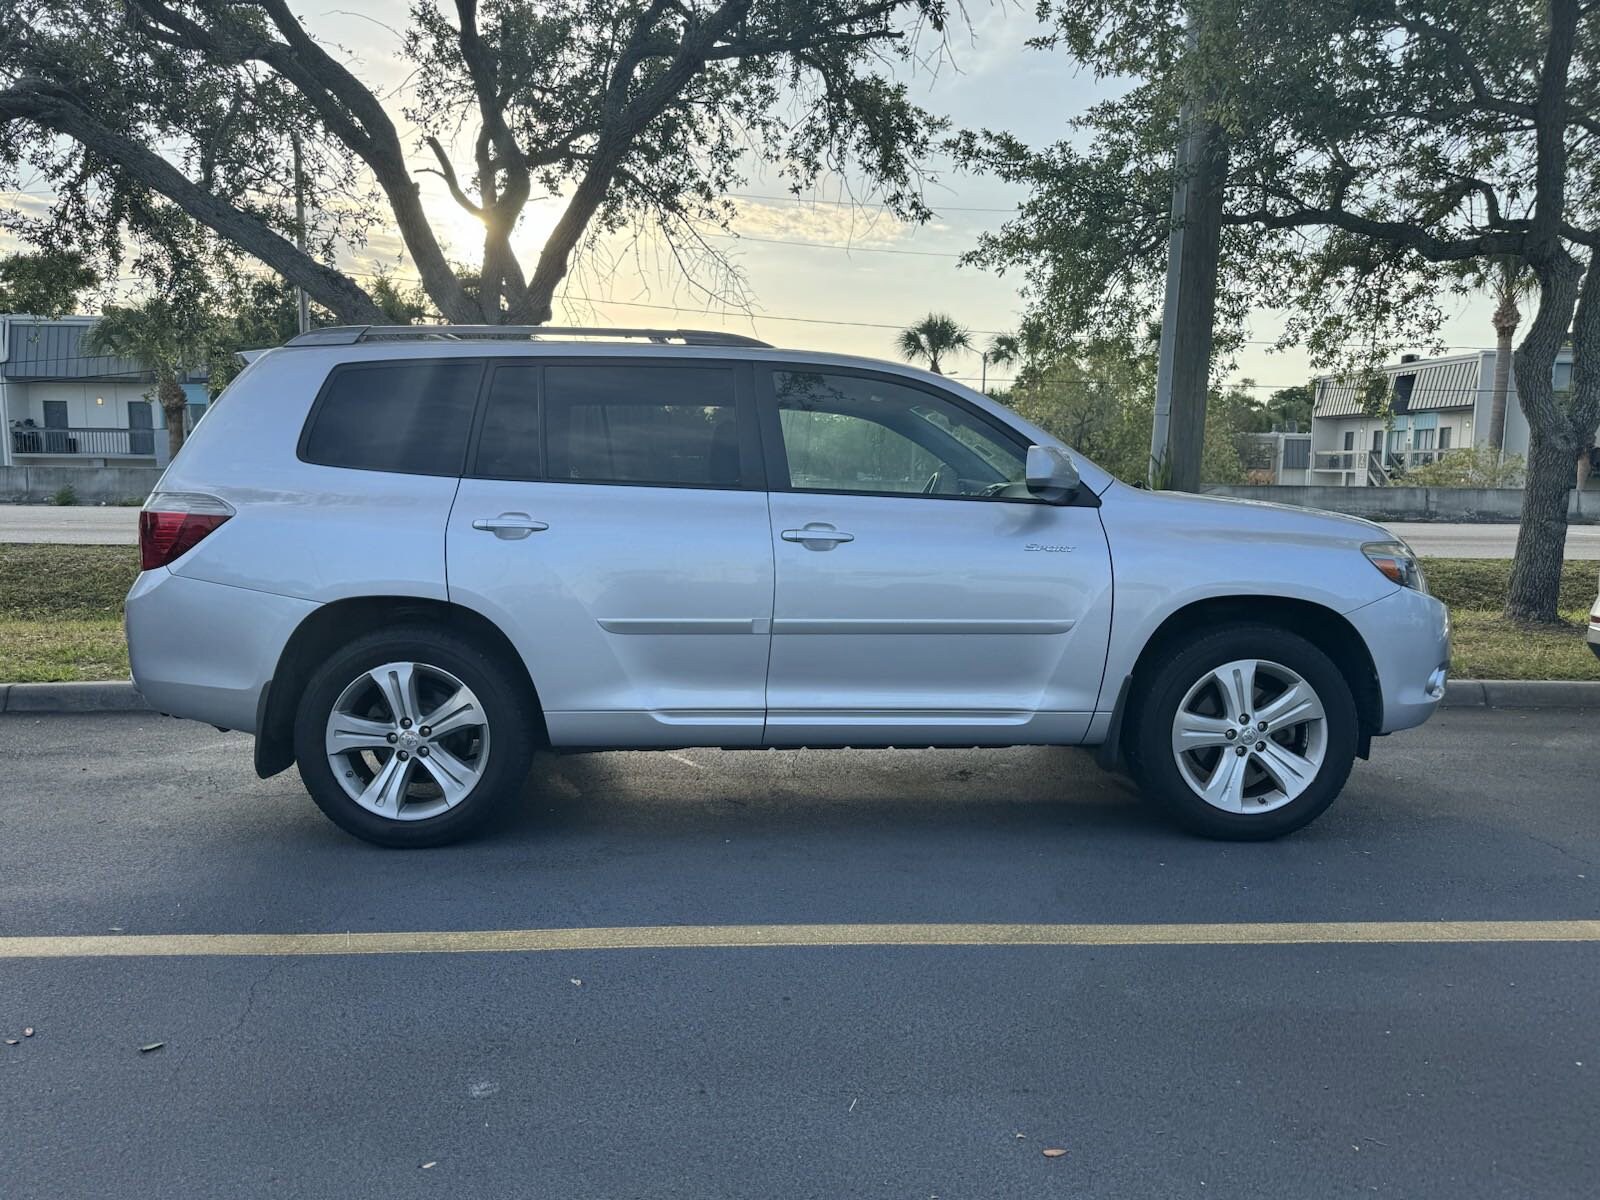 Used 2009 Toyota Highlander Sport with VIN JTEES43A692132155 for sale in Port Richey, FL